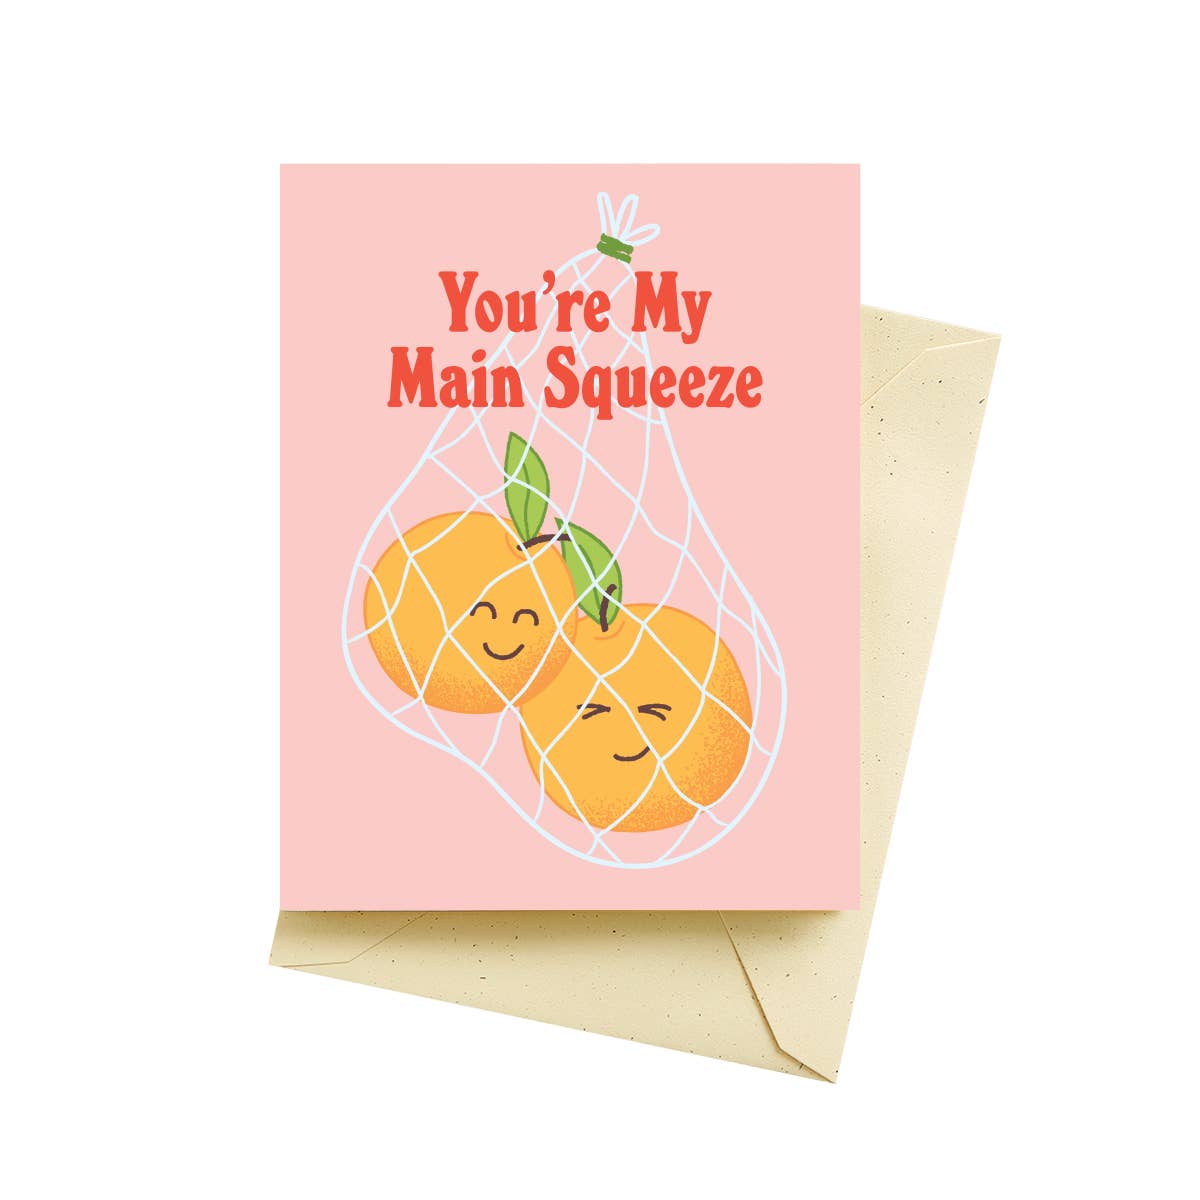 Pink greeting card with two oranges in mesh bag with red text that reads "You're My Main Squeeze" 